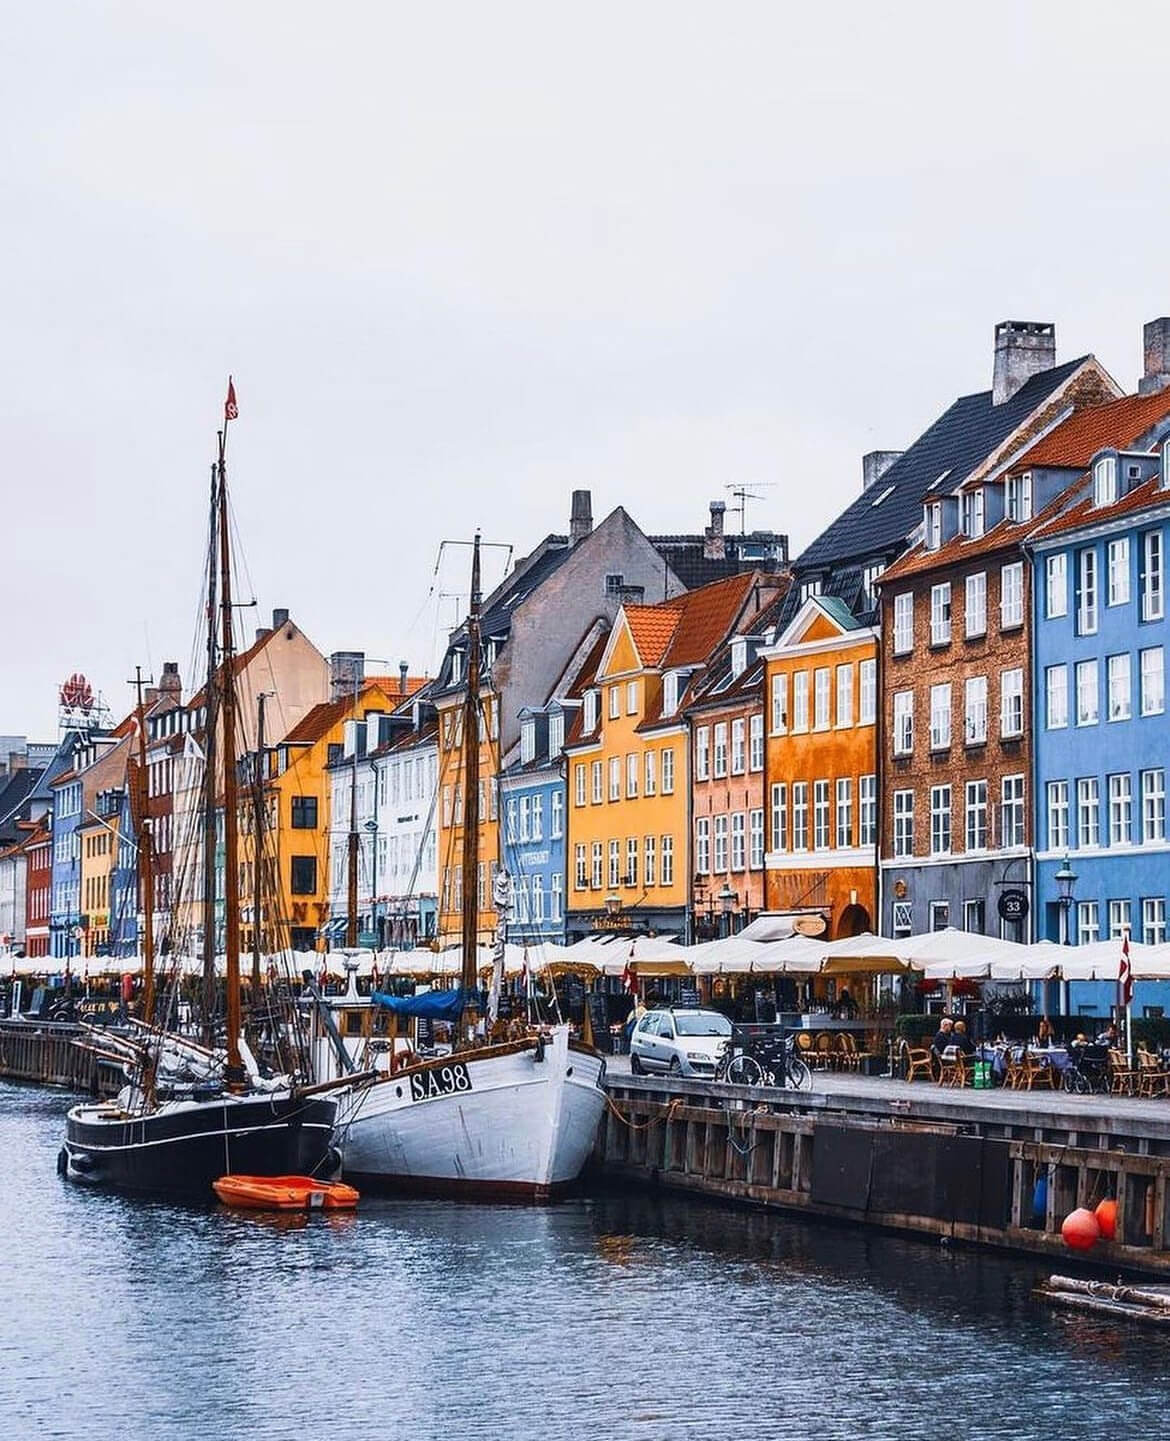 Copenhagen boasts a mix of architectural styles that contribute to its beauty.